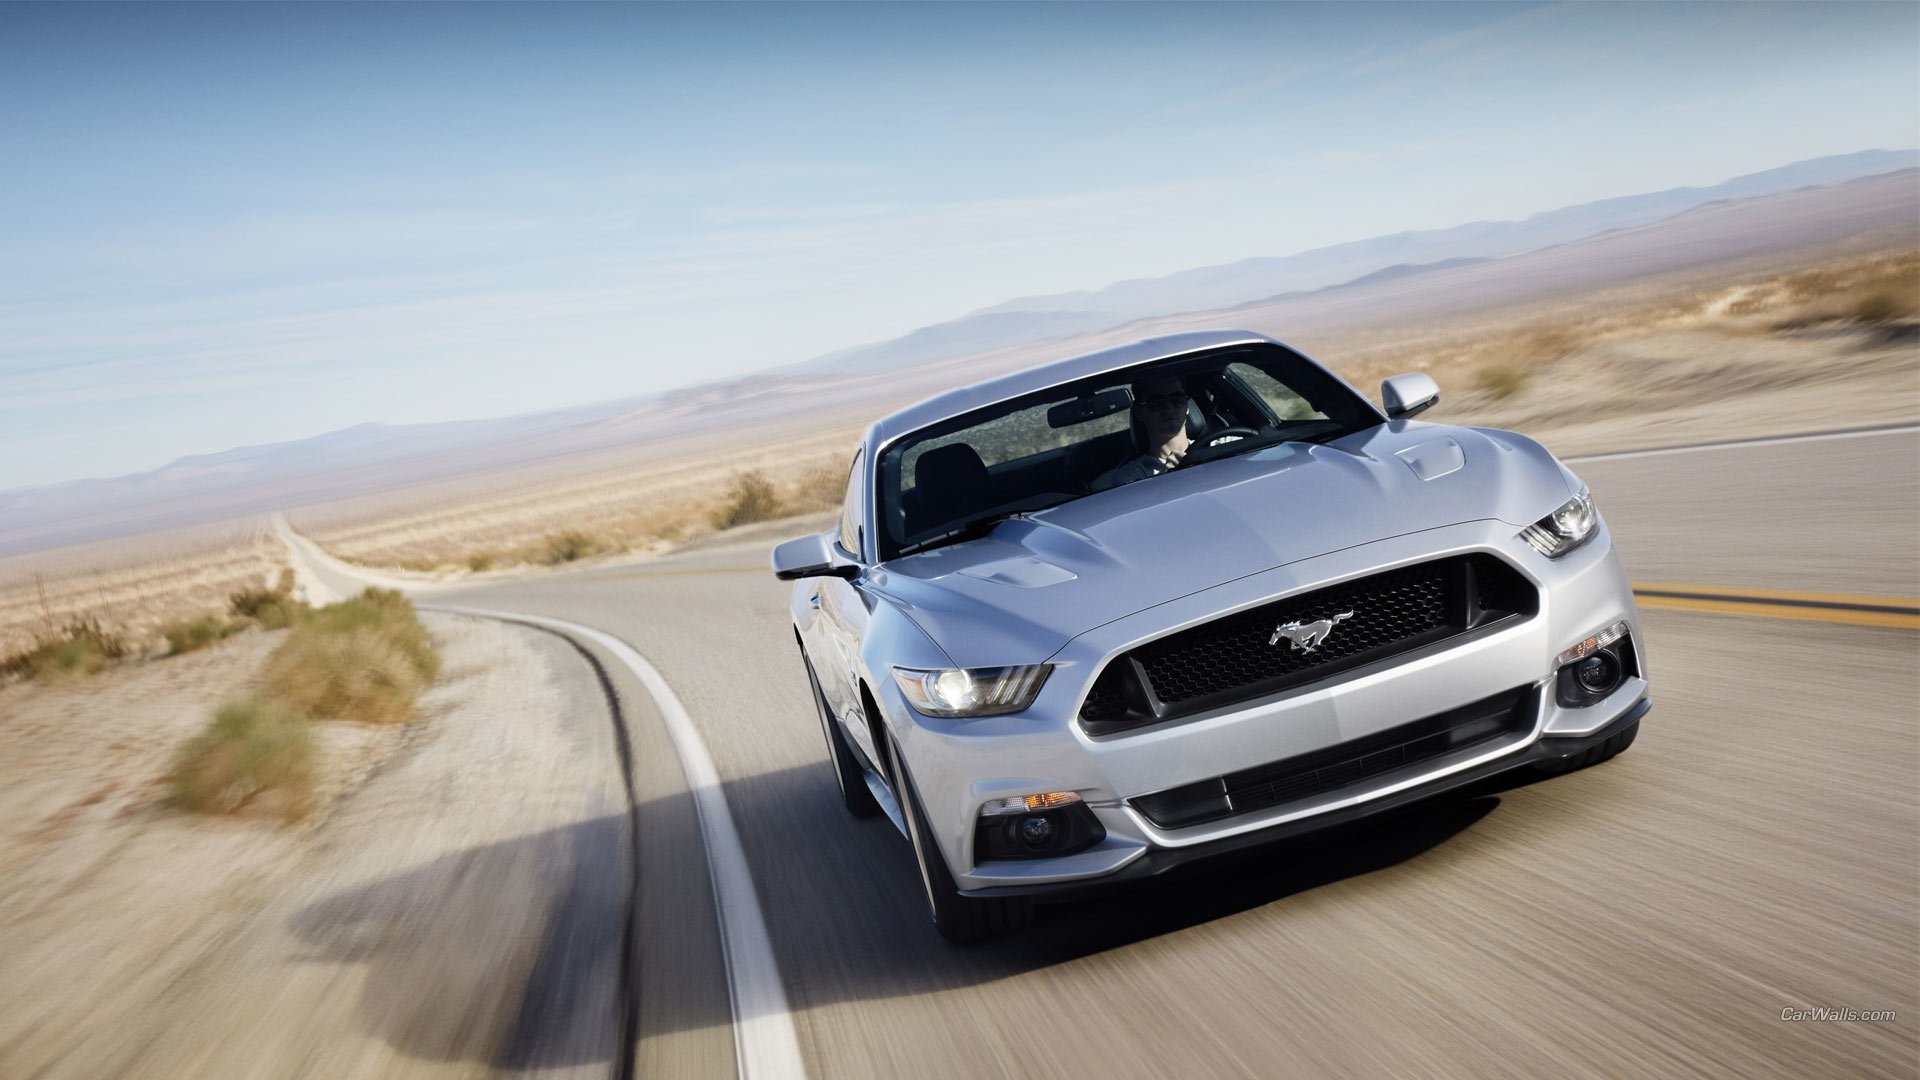 1920x1080 Vehicles - 2015 Ford Mustang GT Wallpaper